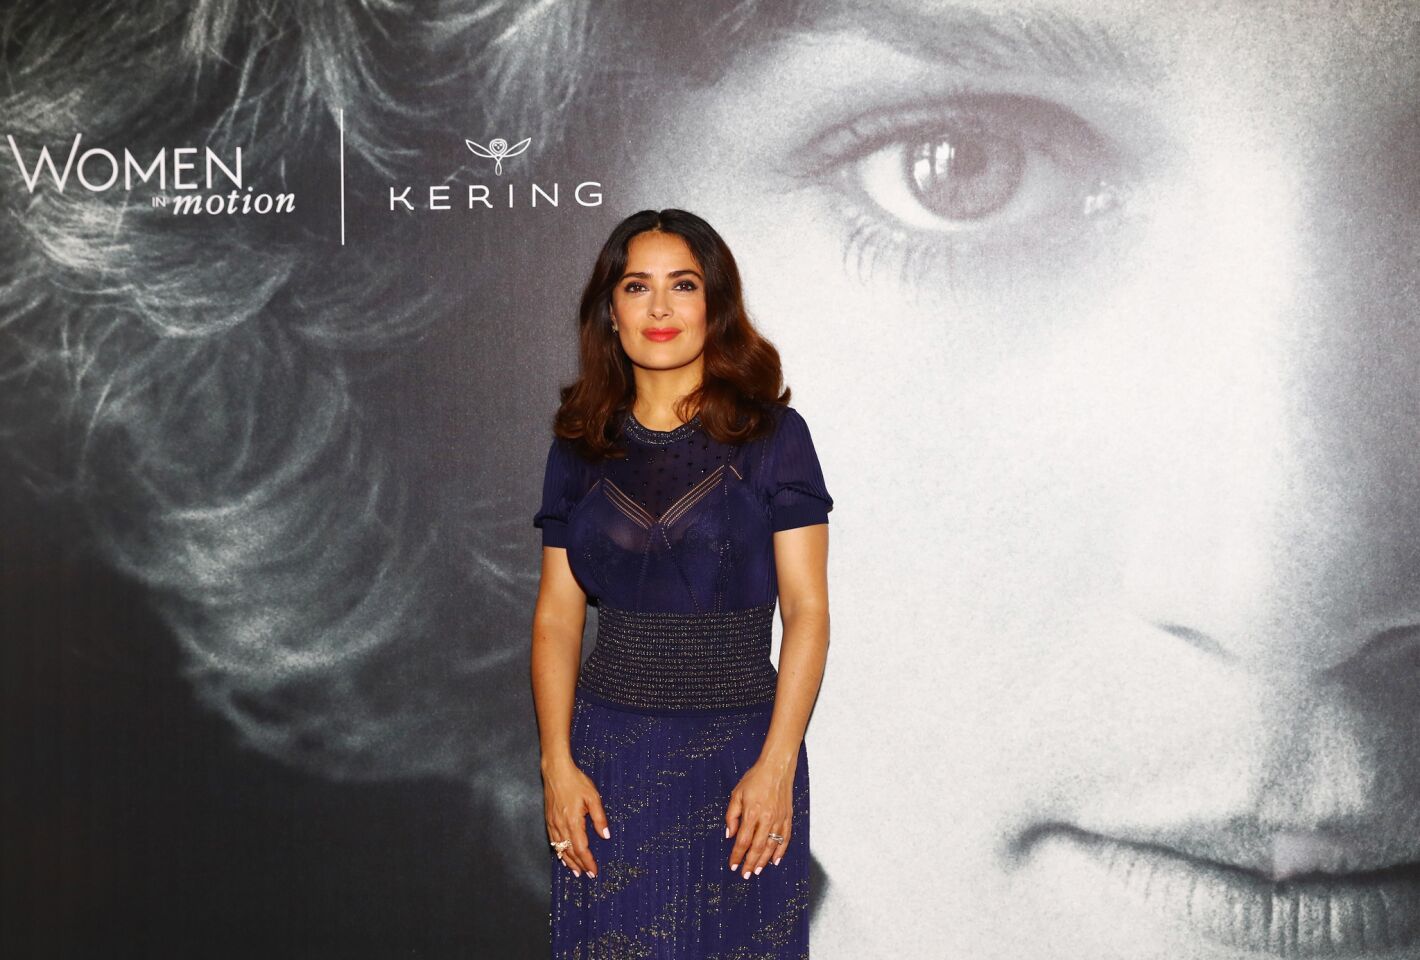 Salma Hayek Pinault attends Kering Women in Motion talk at the Cannes Film Festival on Monday.